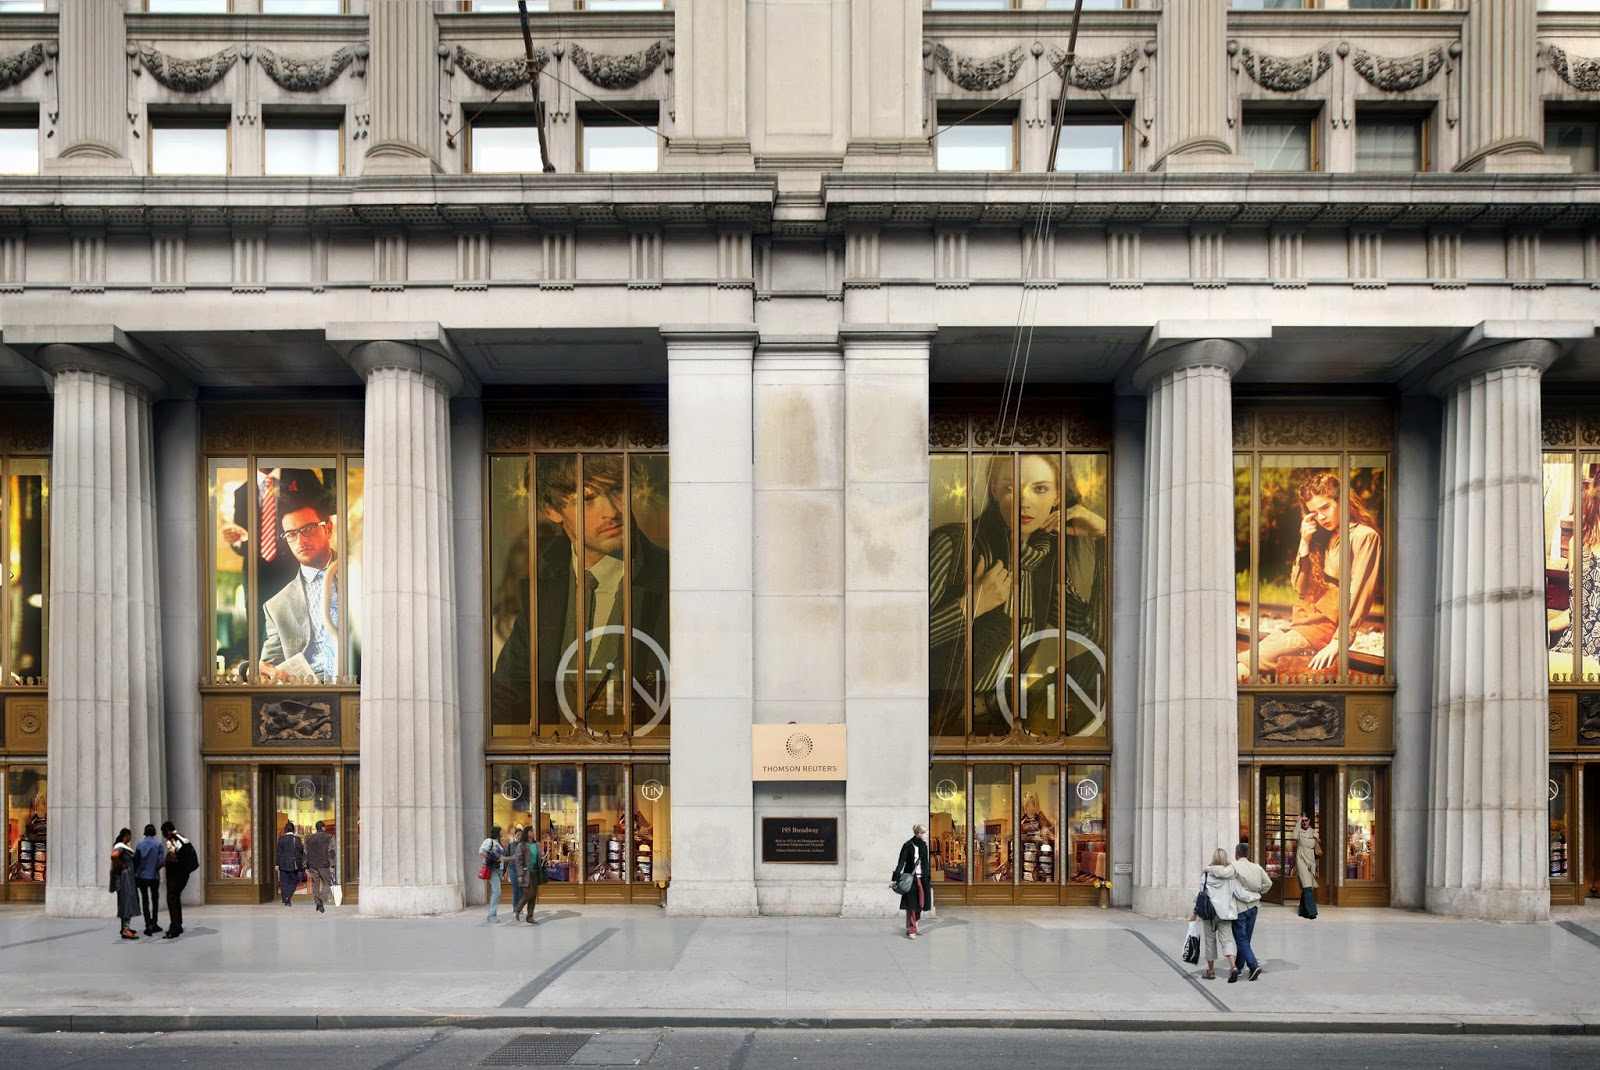 Attention Financial District: You're about to get a HUGE Anthropologie!